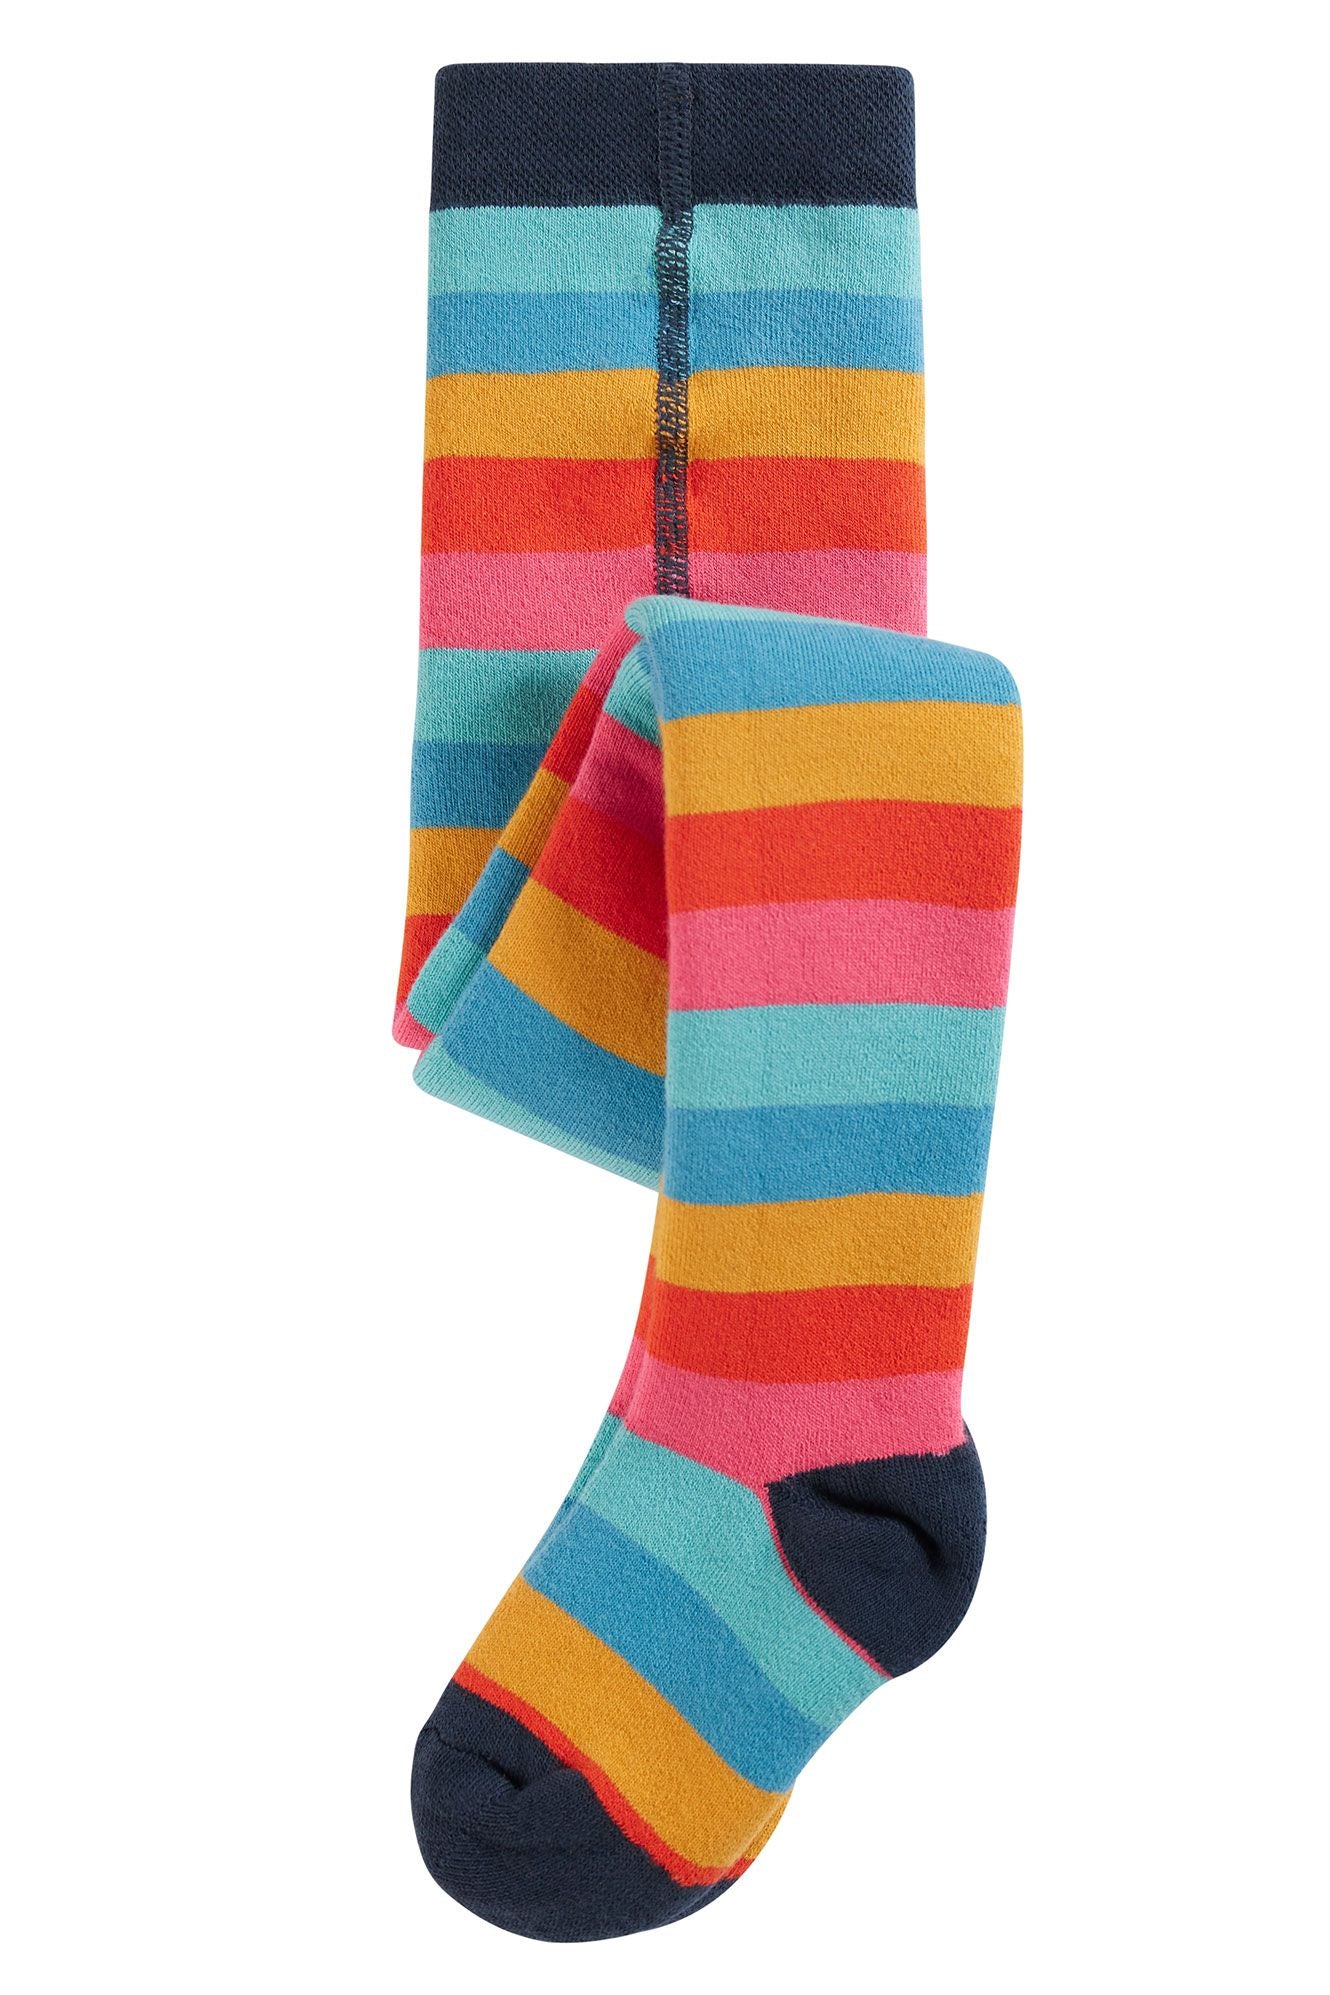 frugi honeysuckle rainbow stripe toasty tights at whippersnappers online